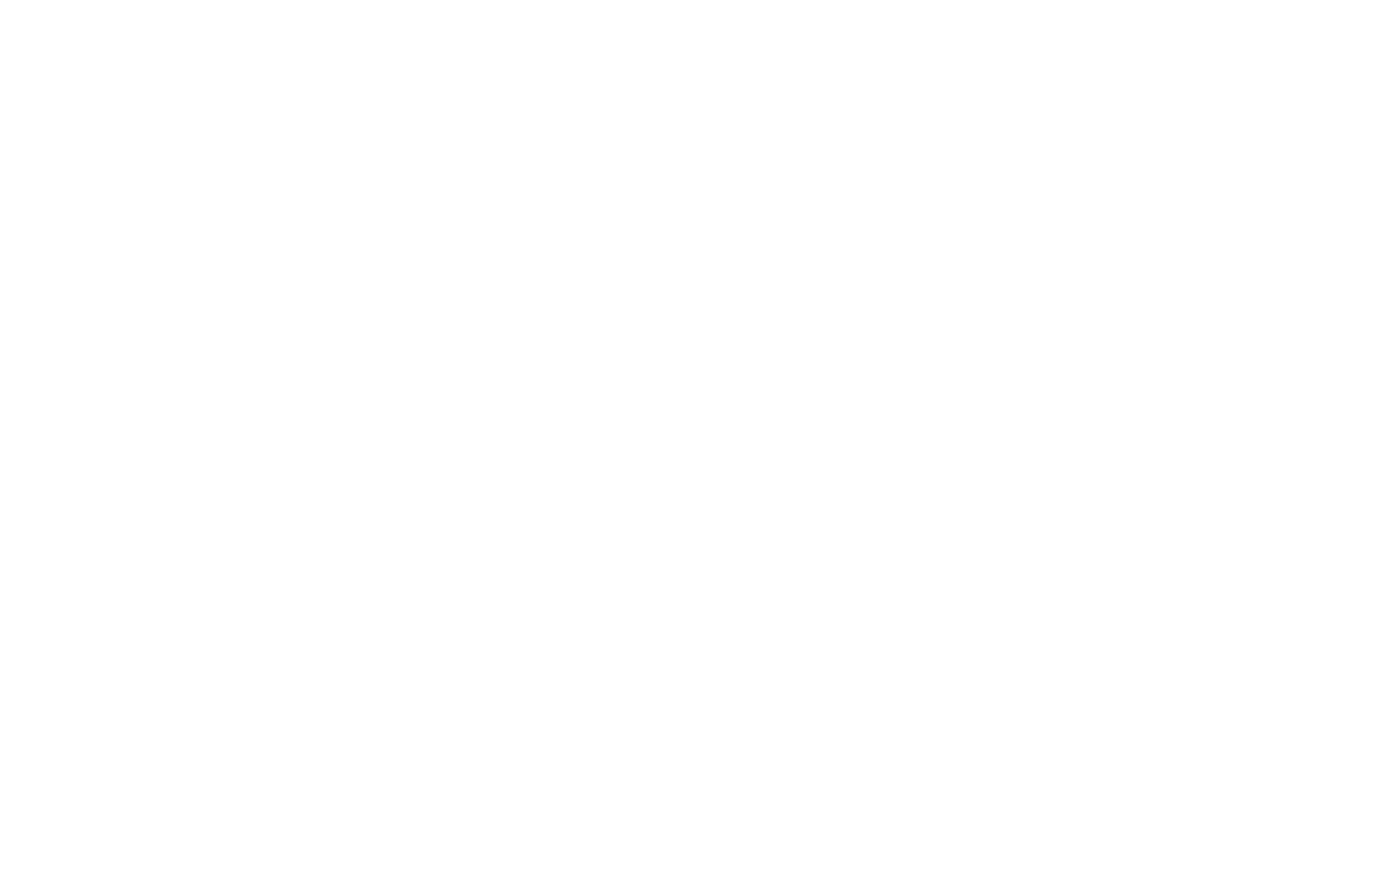 PWC logo: PWC works with Empiric for finance and accounting recruitment.